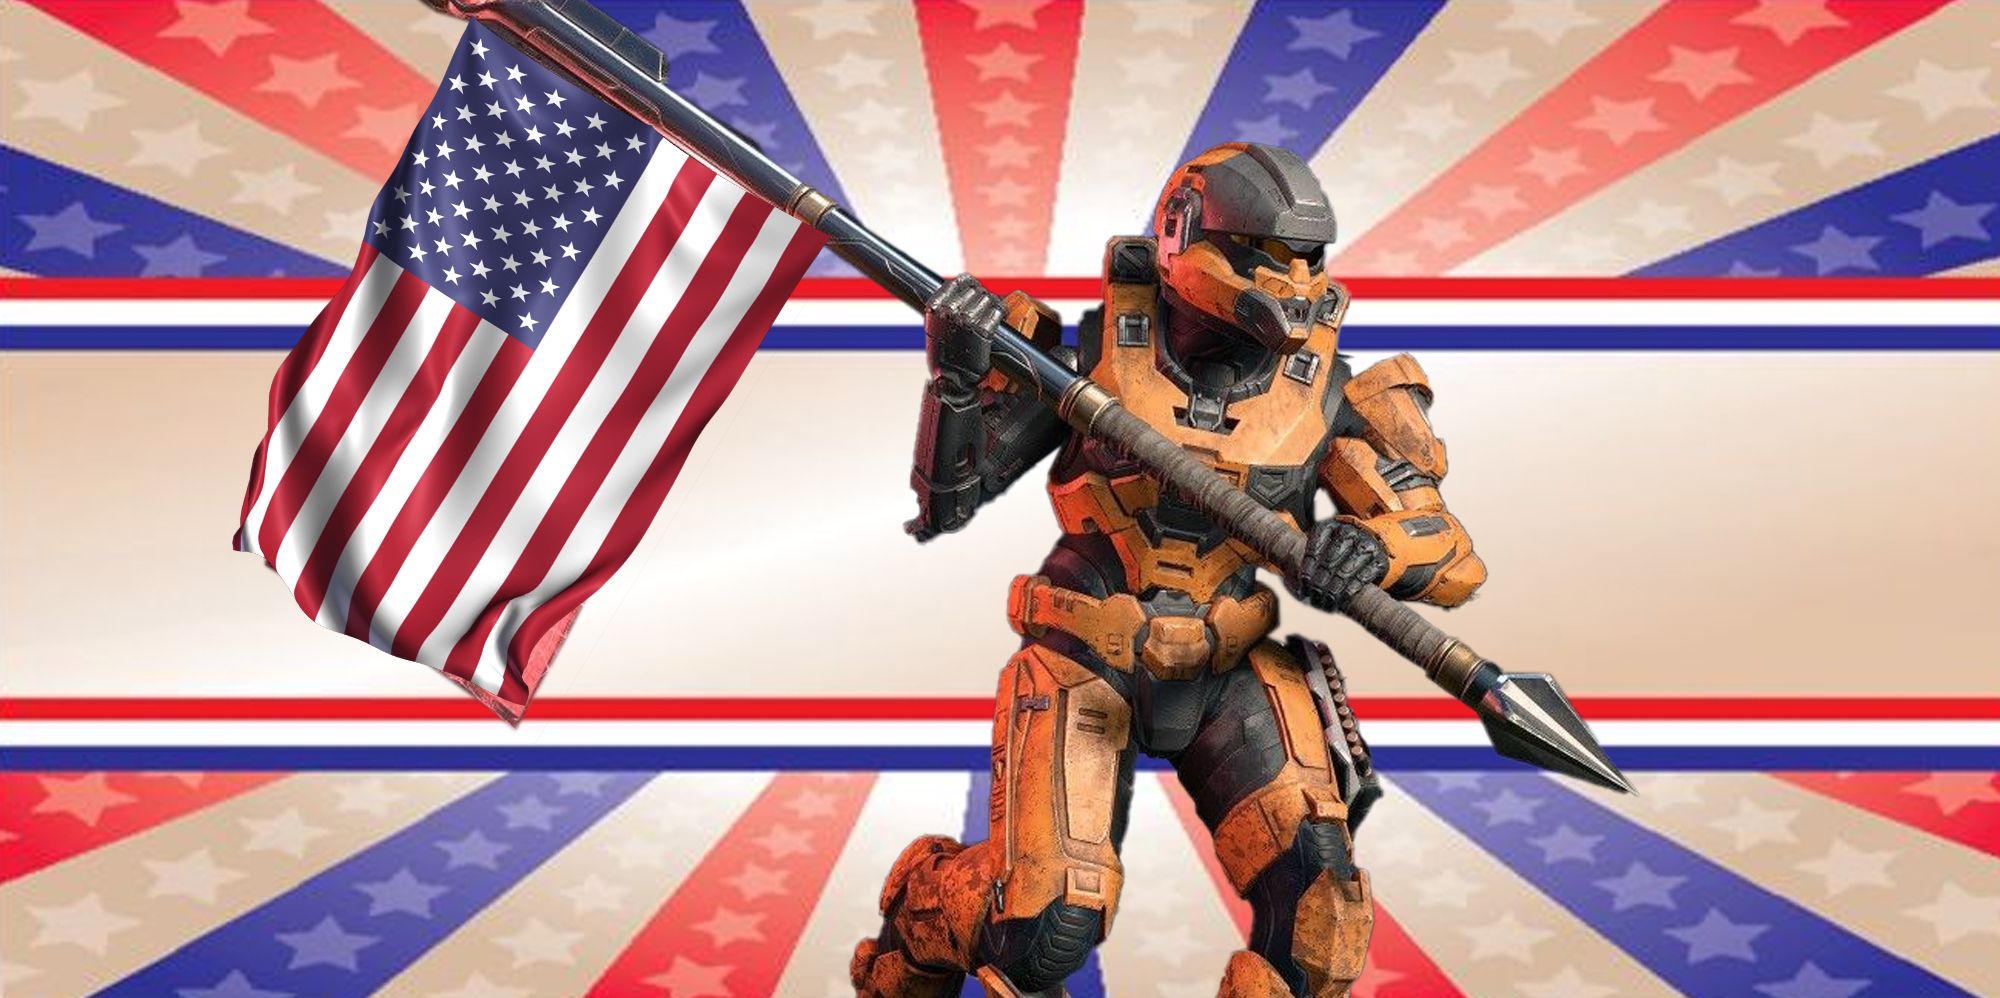 A soldier in Halo holding the American flag. 